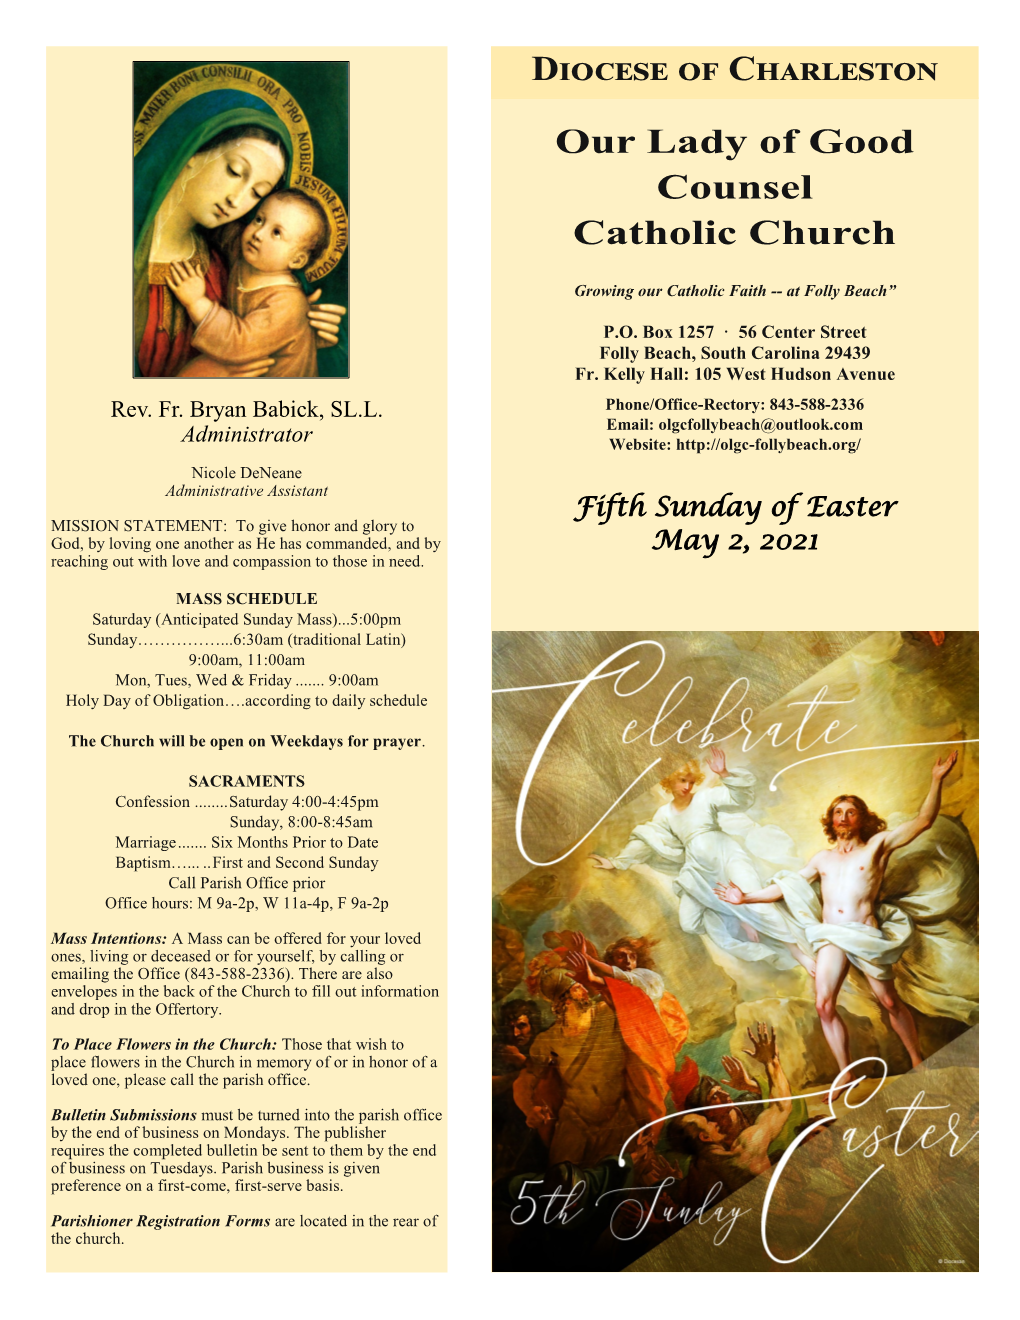 Fifth Sunday of Easter May 2, 2021